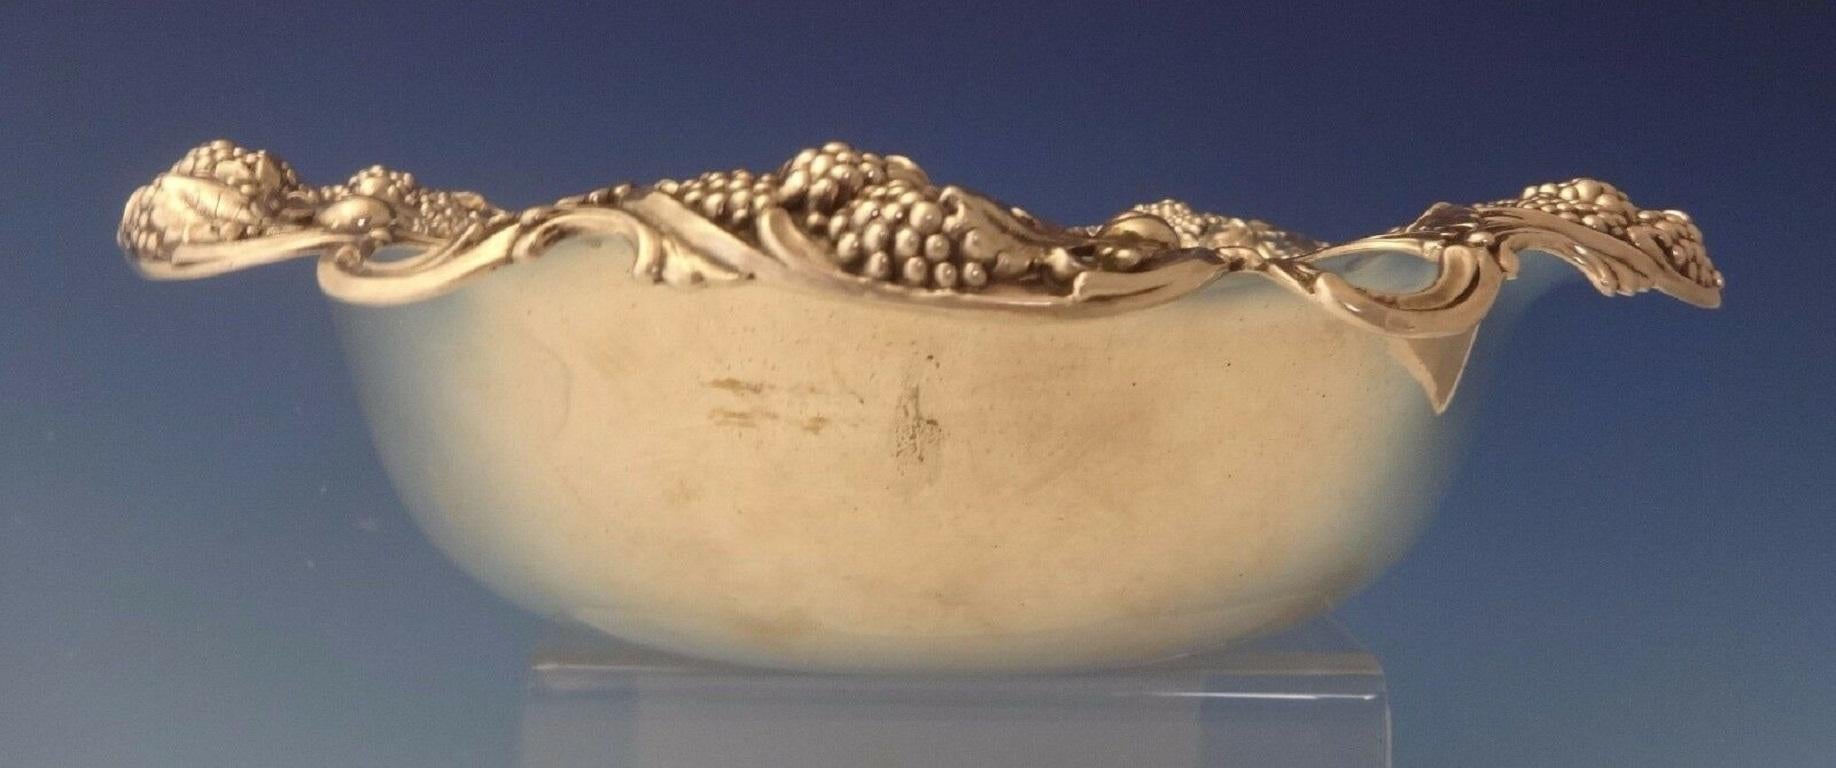 Blackberry by Tiffany & Co. sterling fruit bowl featuring a pierced border of swirled blackberries and leaves. It has a FWB monogram. The piece is marked with a date letter C for 1902-1907 and #16152/2602. It measures 2 5/8 tall, 10 in diameter, and